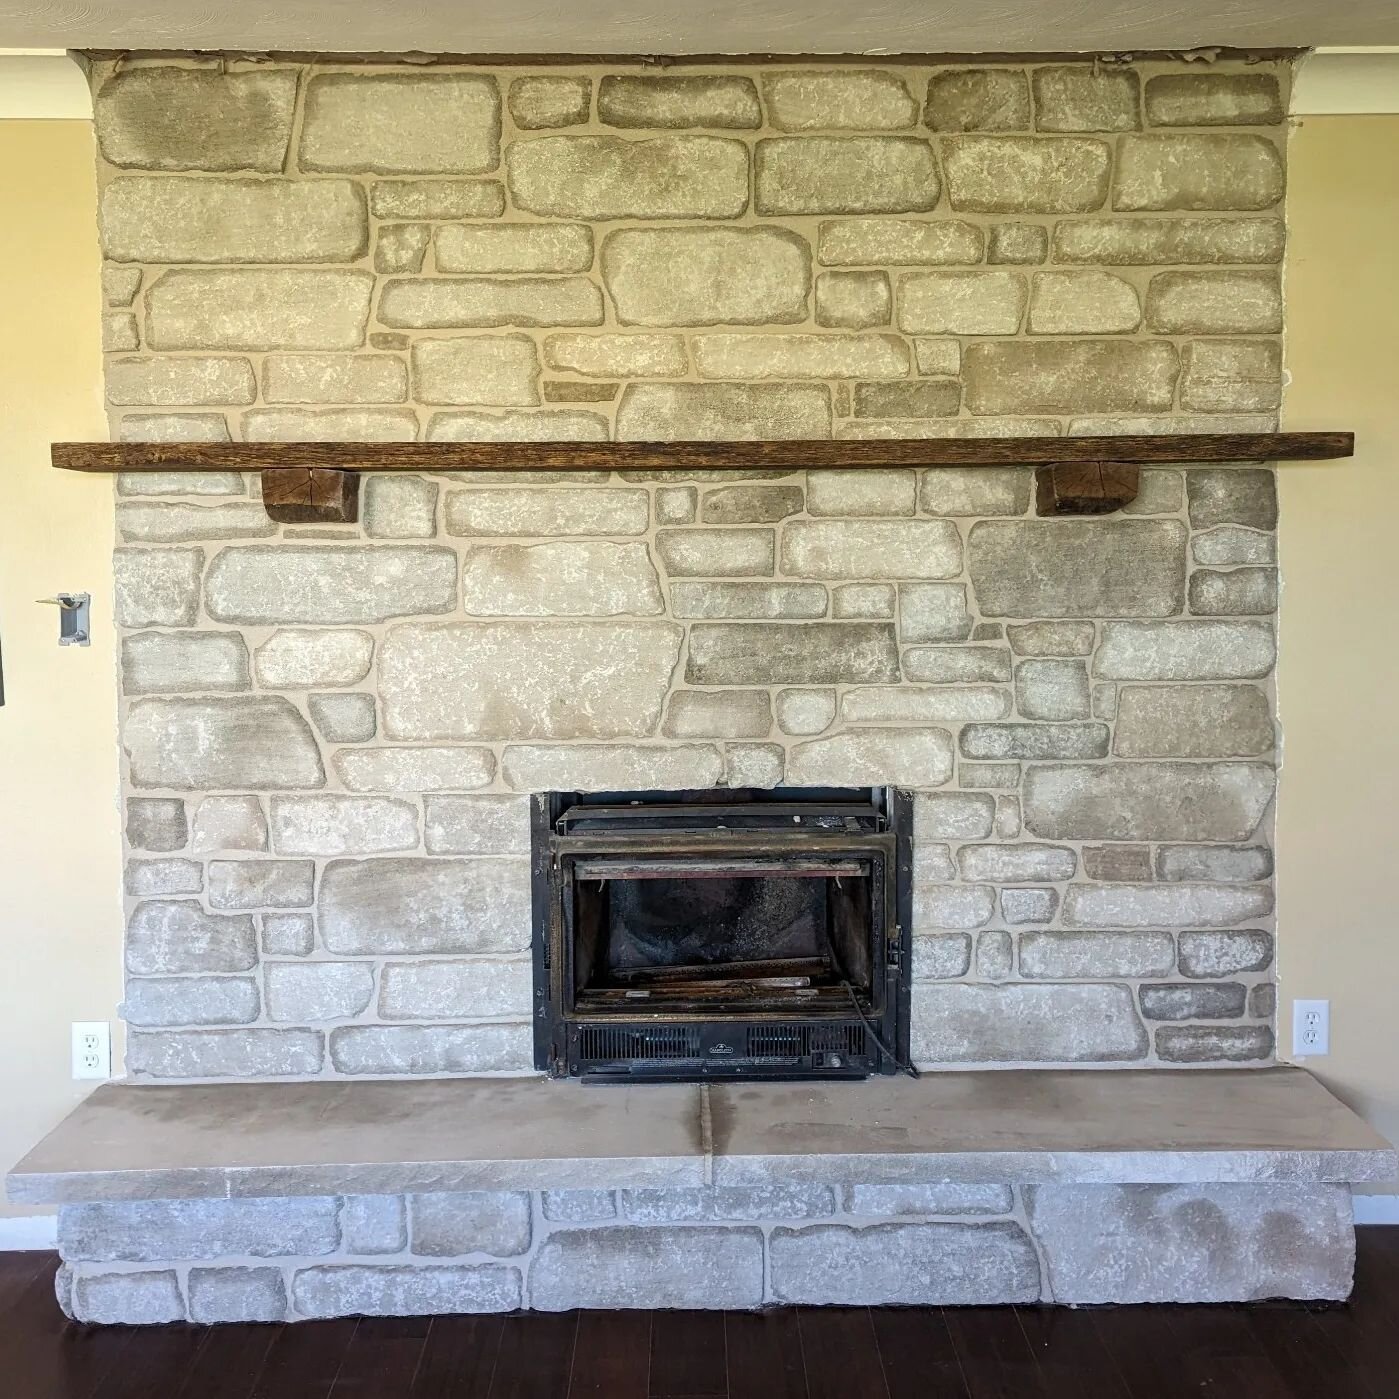 The stone we installed on this fireplace 🔥 is limestone and we used white mortar to contrast the lightness of the stone. We also custom cut a piece of limestone to use for the hearth.